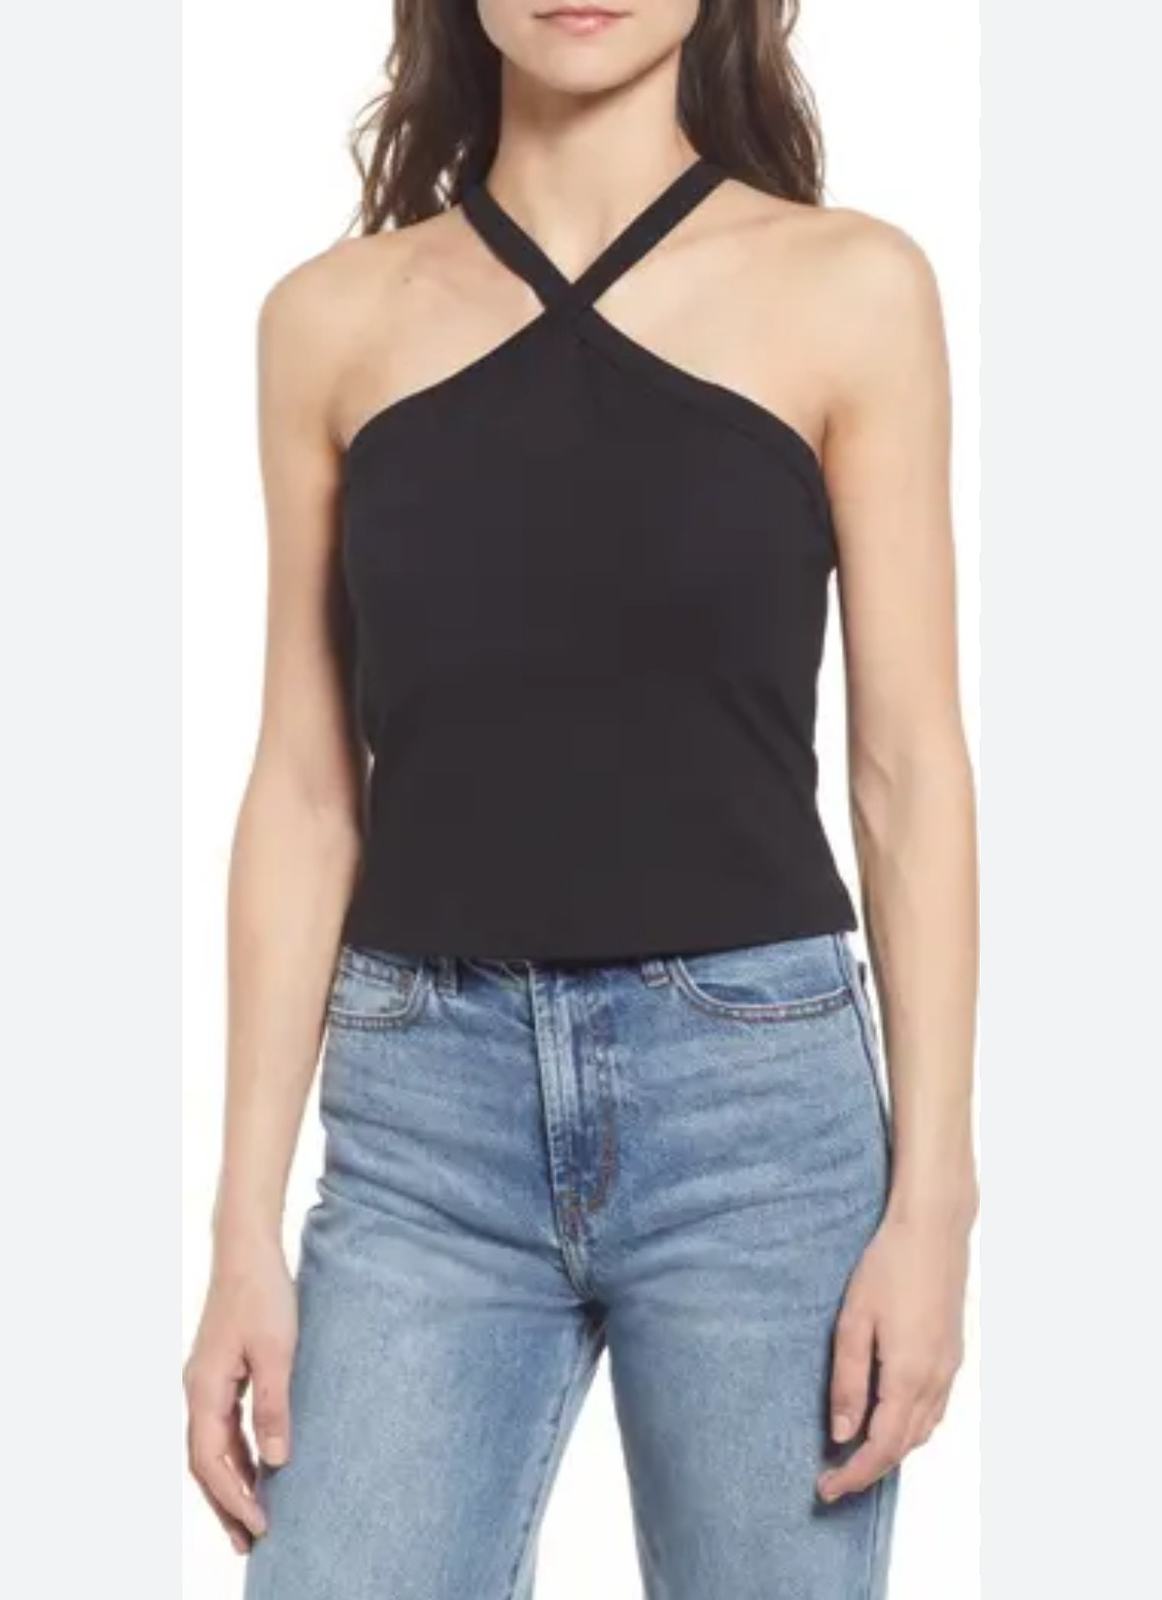 Primary image for French Connection Women's Black Halter Neck Jersey Top Built In Shelf Bra XL NWT